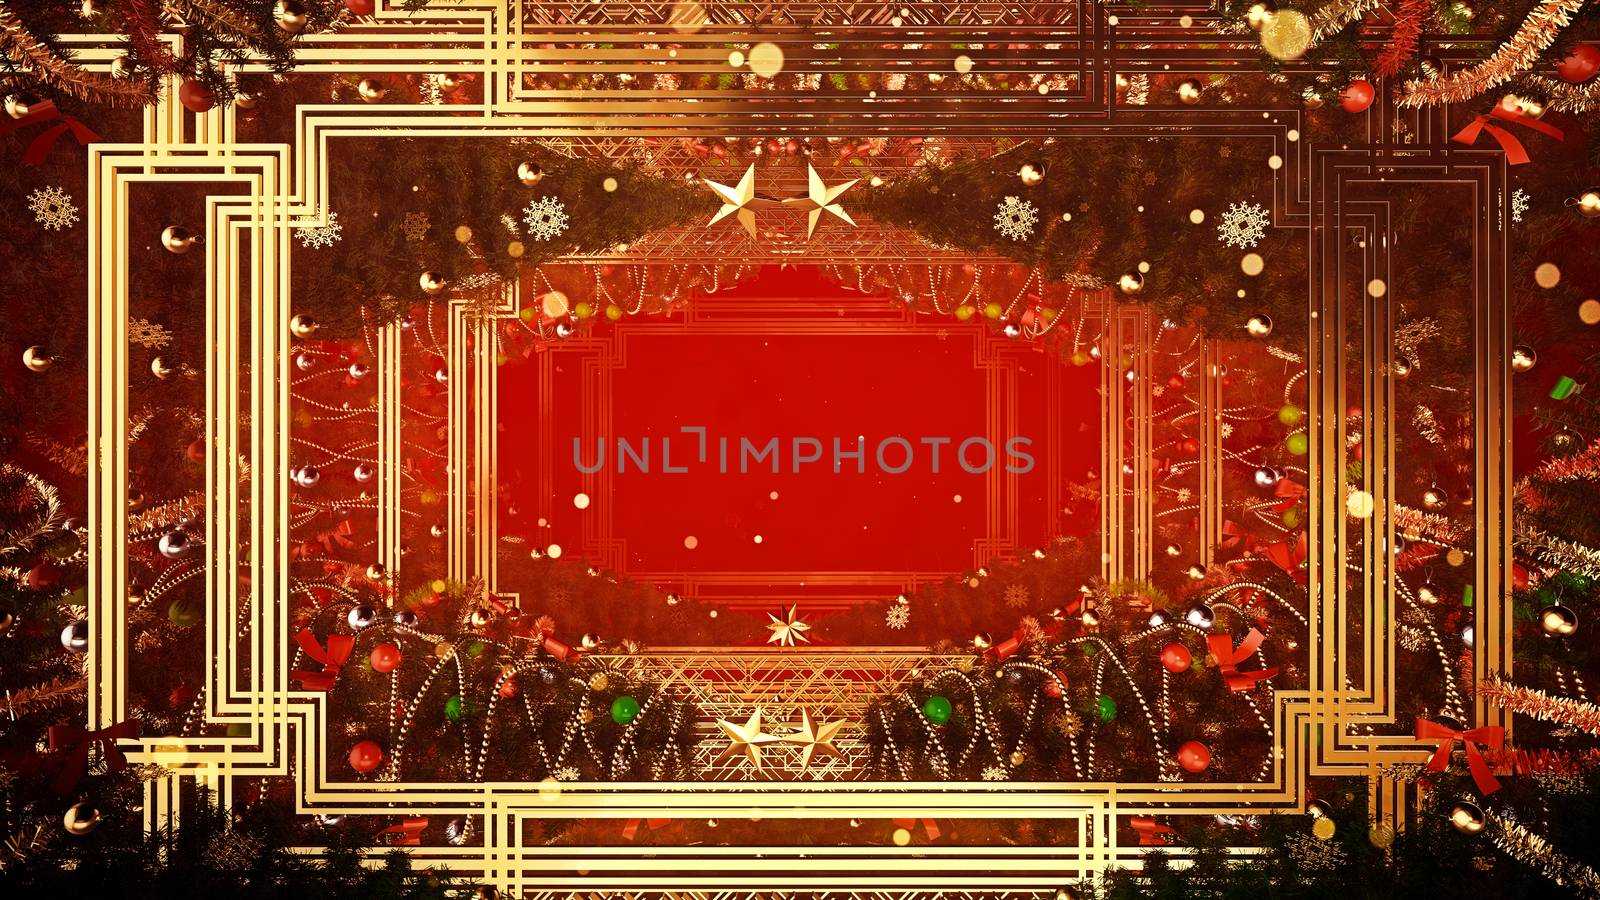 3D illustration Background for advertising and wallpaper in festival  and celebrate scene. 3D rendering in decorative concept.